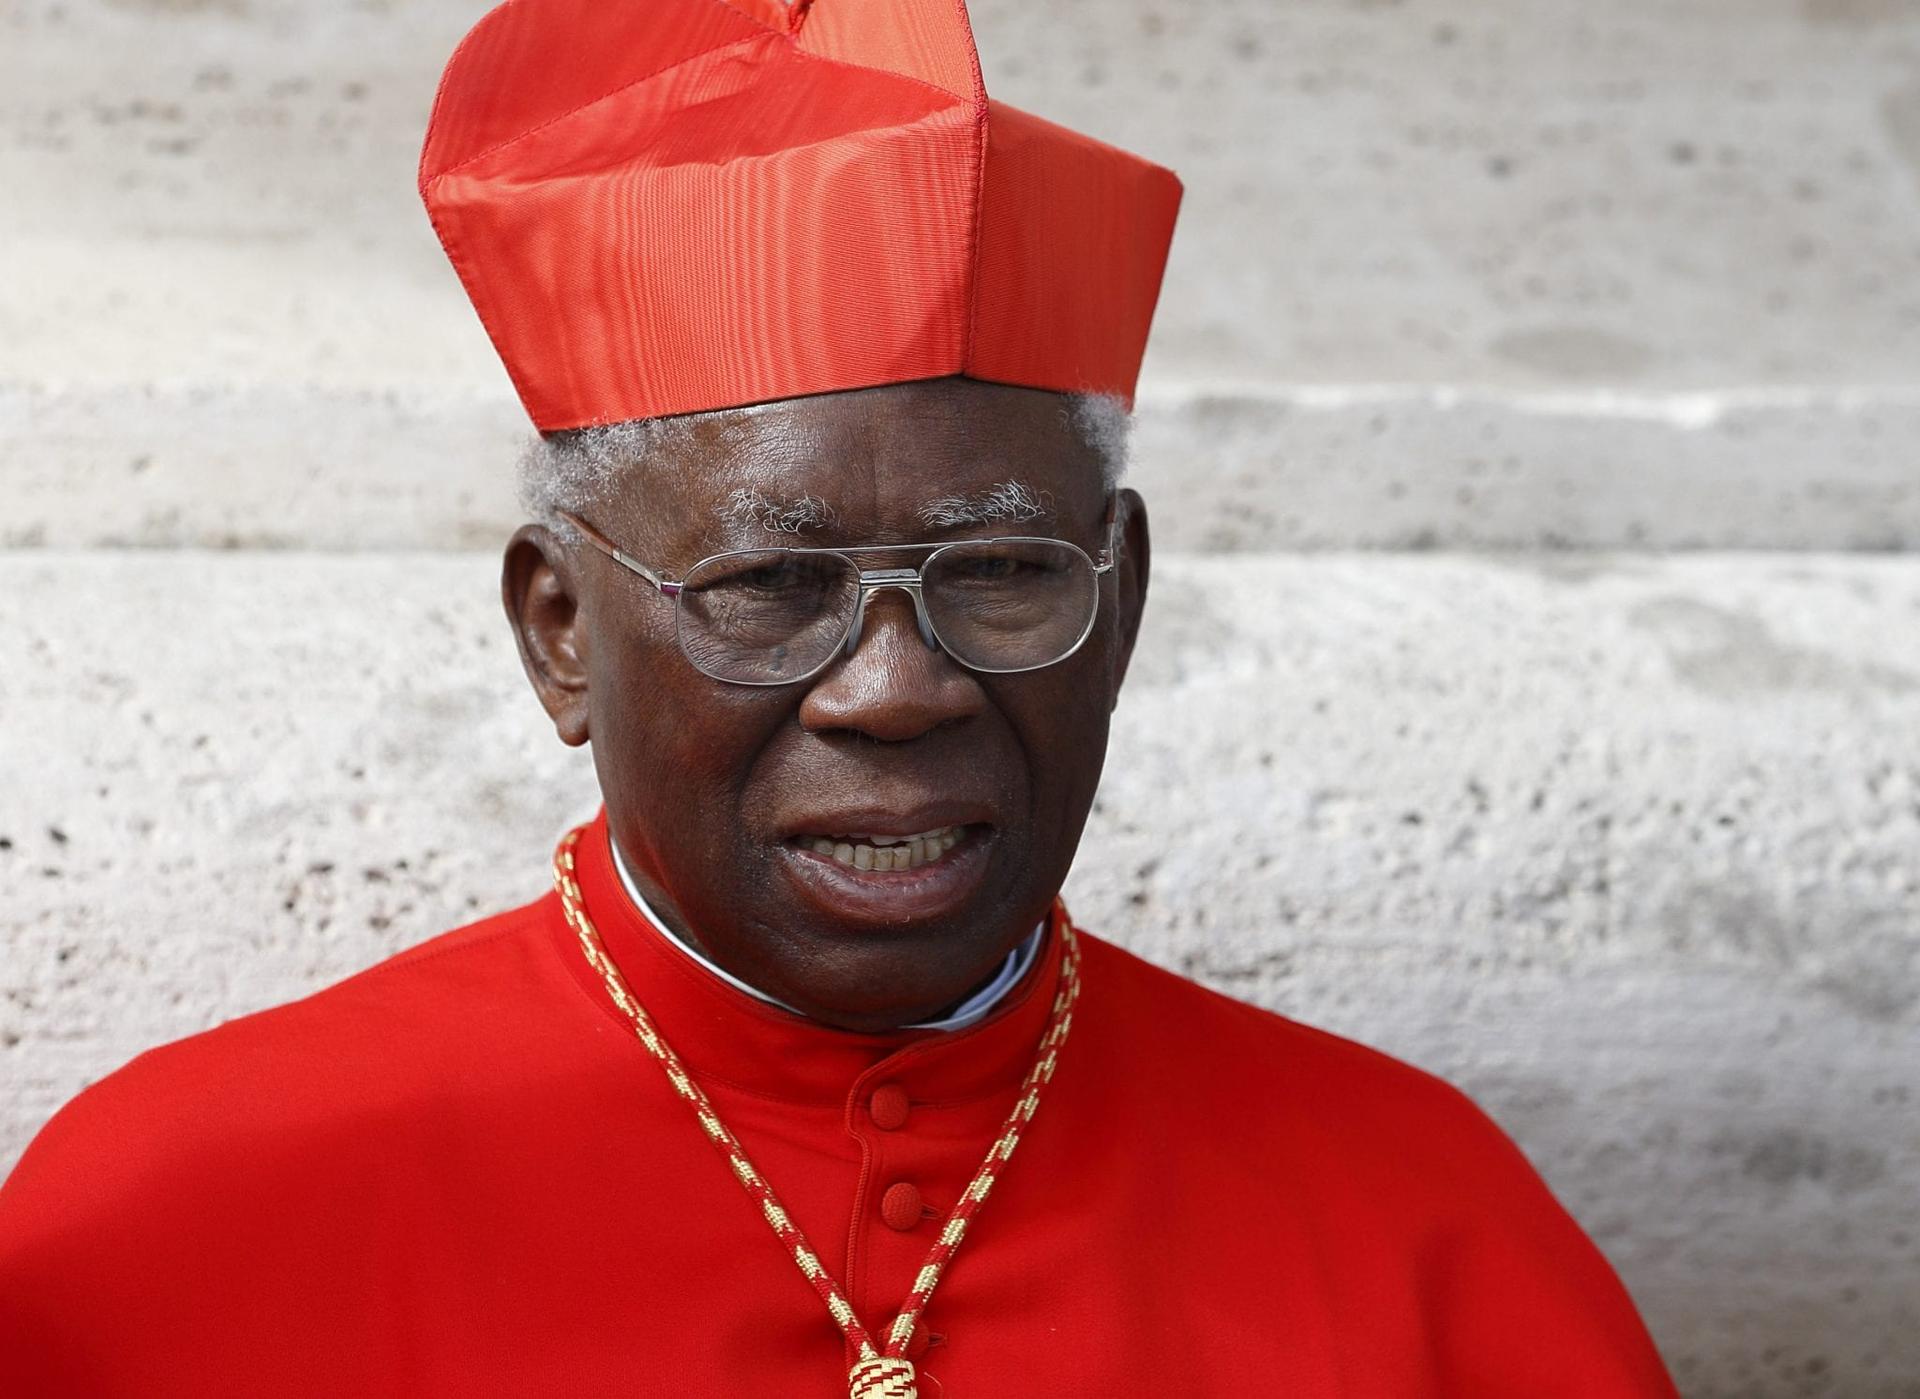 Cardinal: ‘By African standards, I’m not conservative, I’m normal’